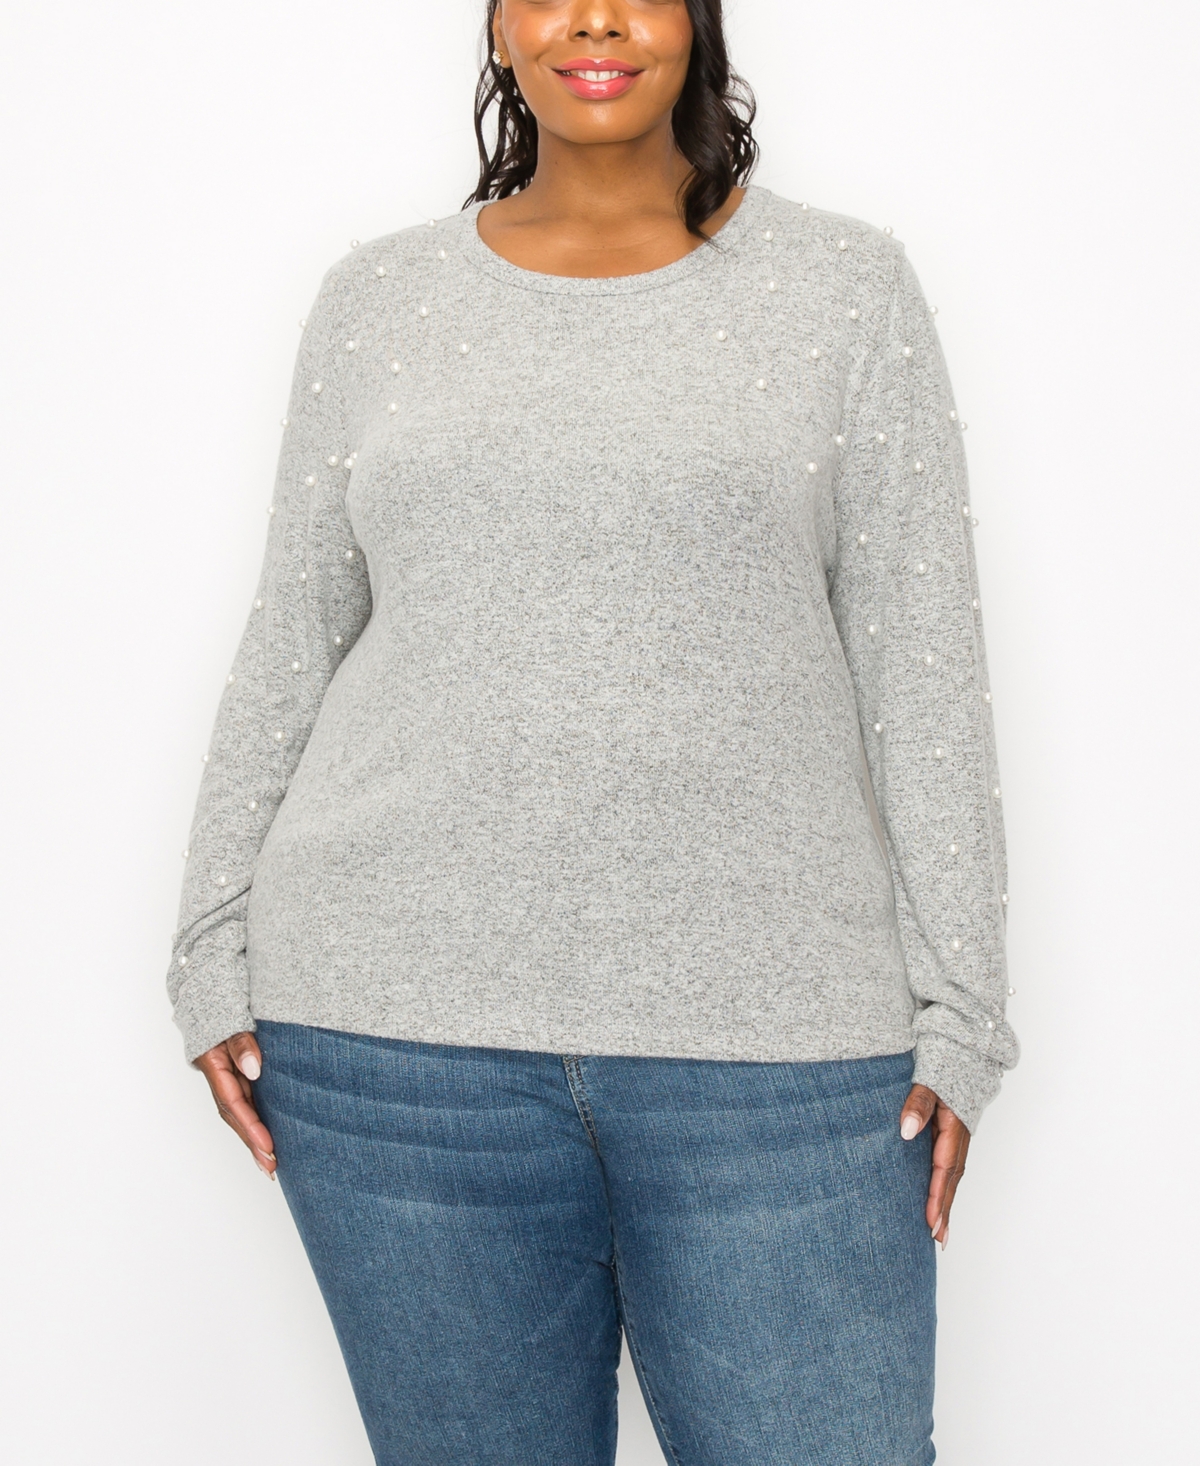 Coin 1804 Plus Size Long Sleeve Pullover Top With Imitation Pearls In Heather Gray